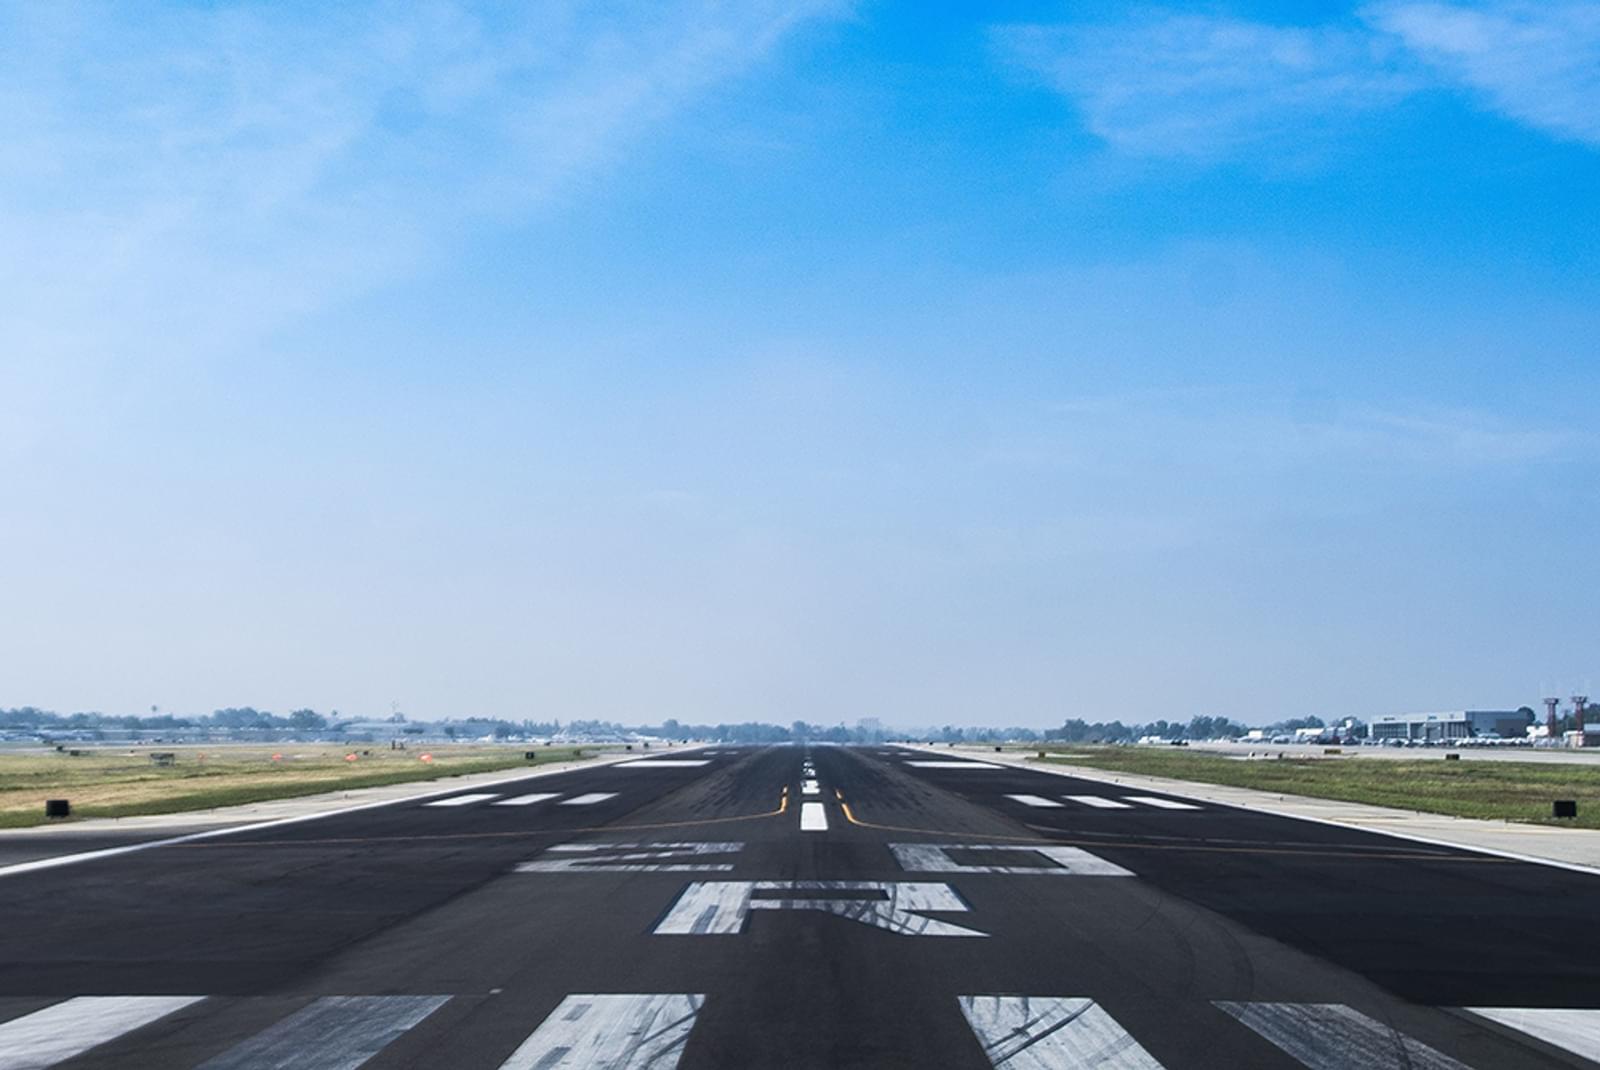 Underneath a bright blue sky, an airplane runway leads off into the horizon, providing a space to land.